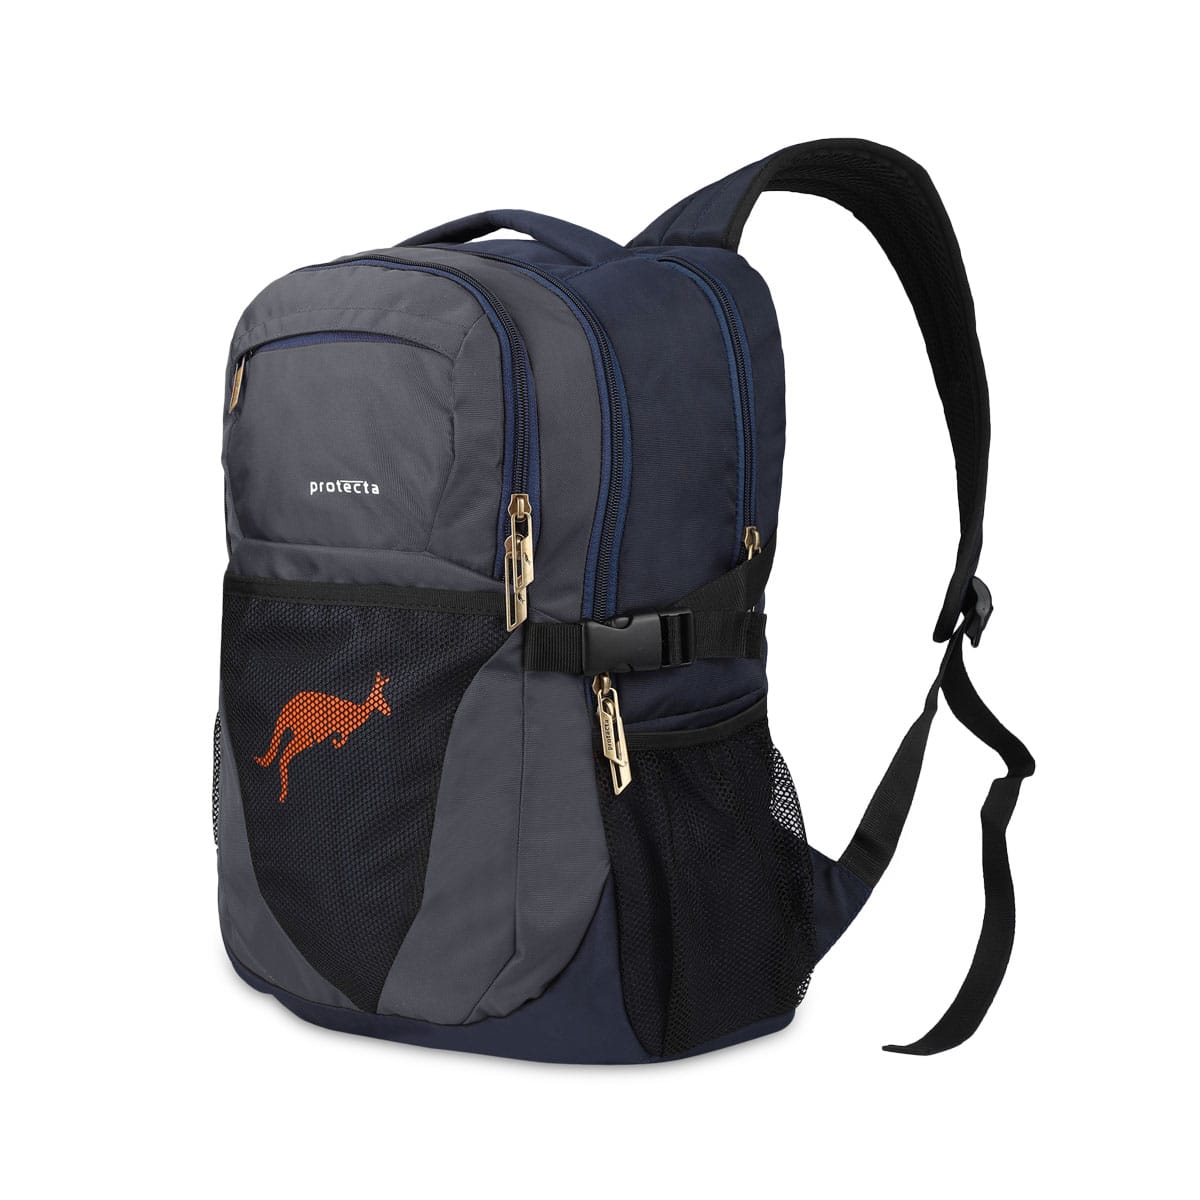 Navy-Grey | Protecta Enigma Laptop Backpack-Main